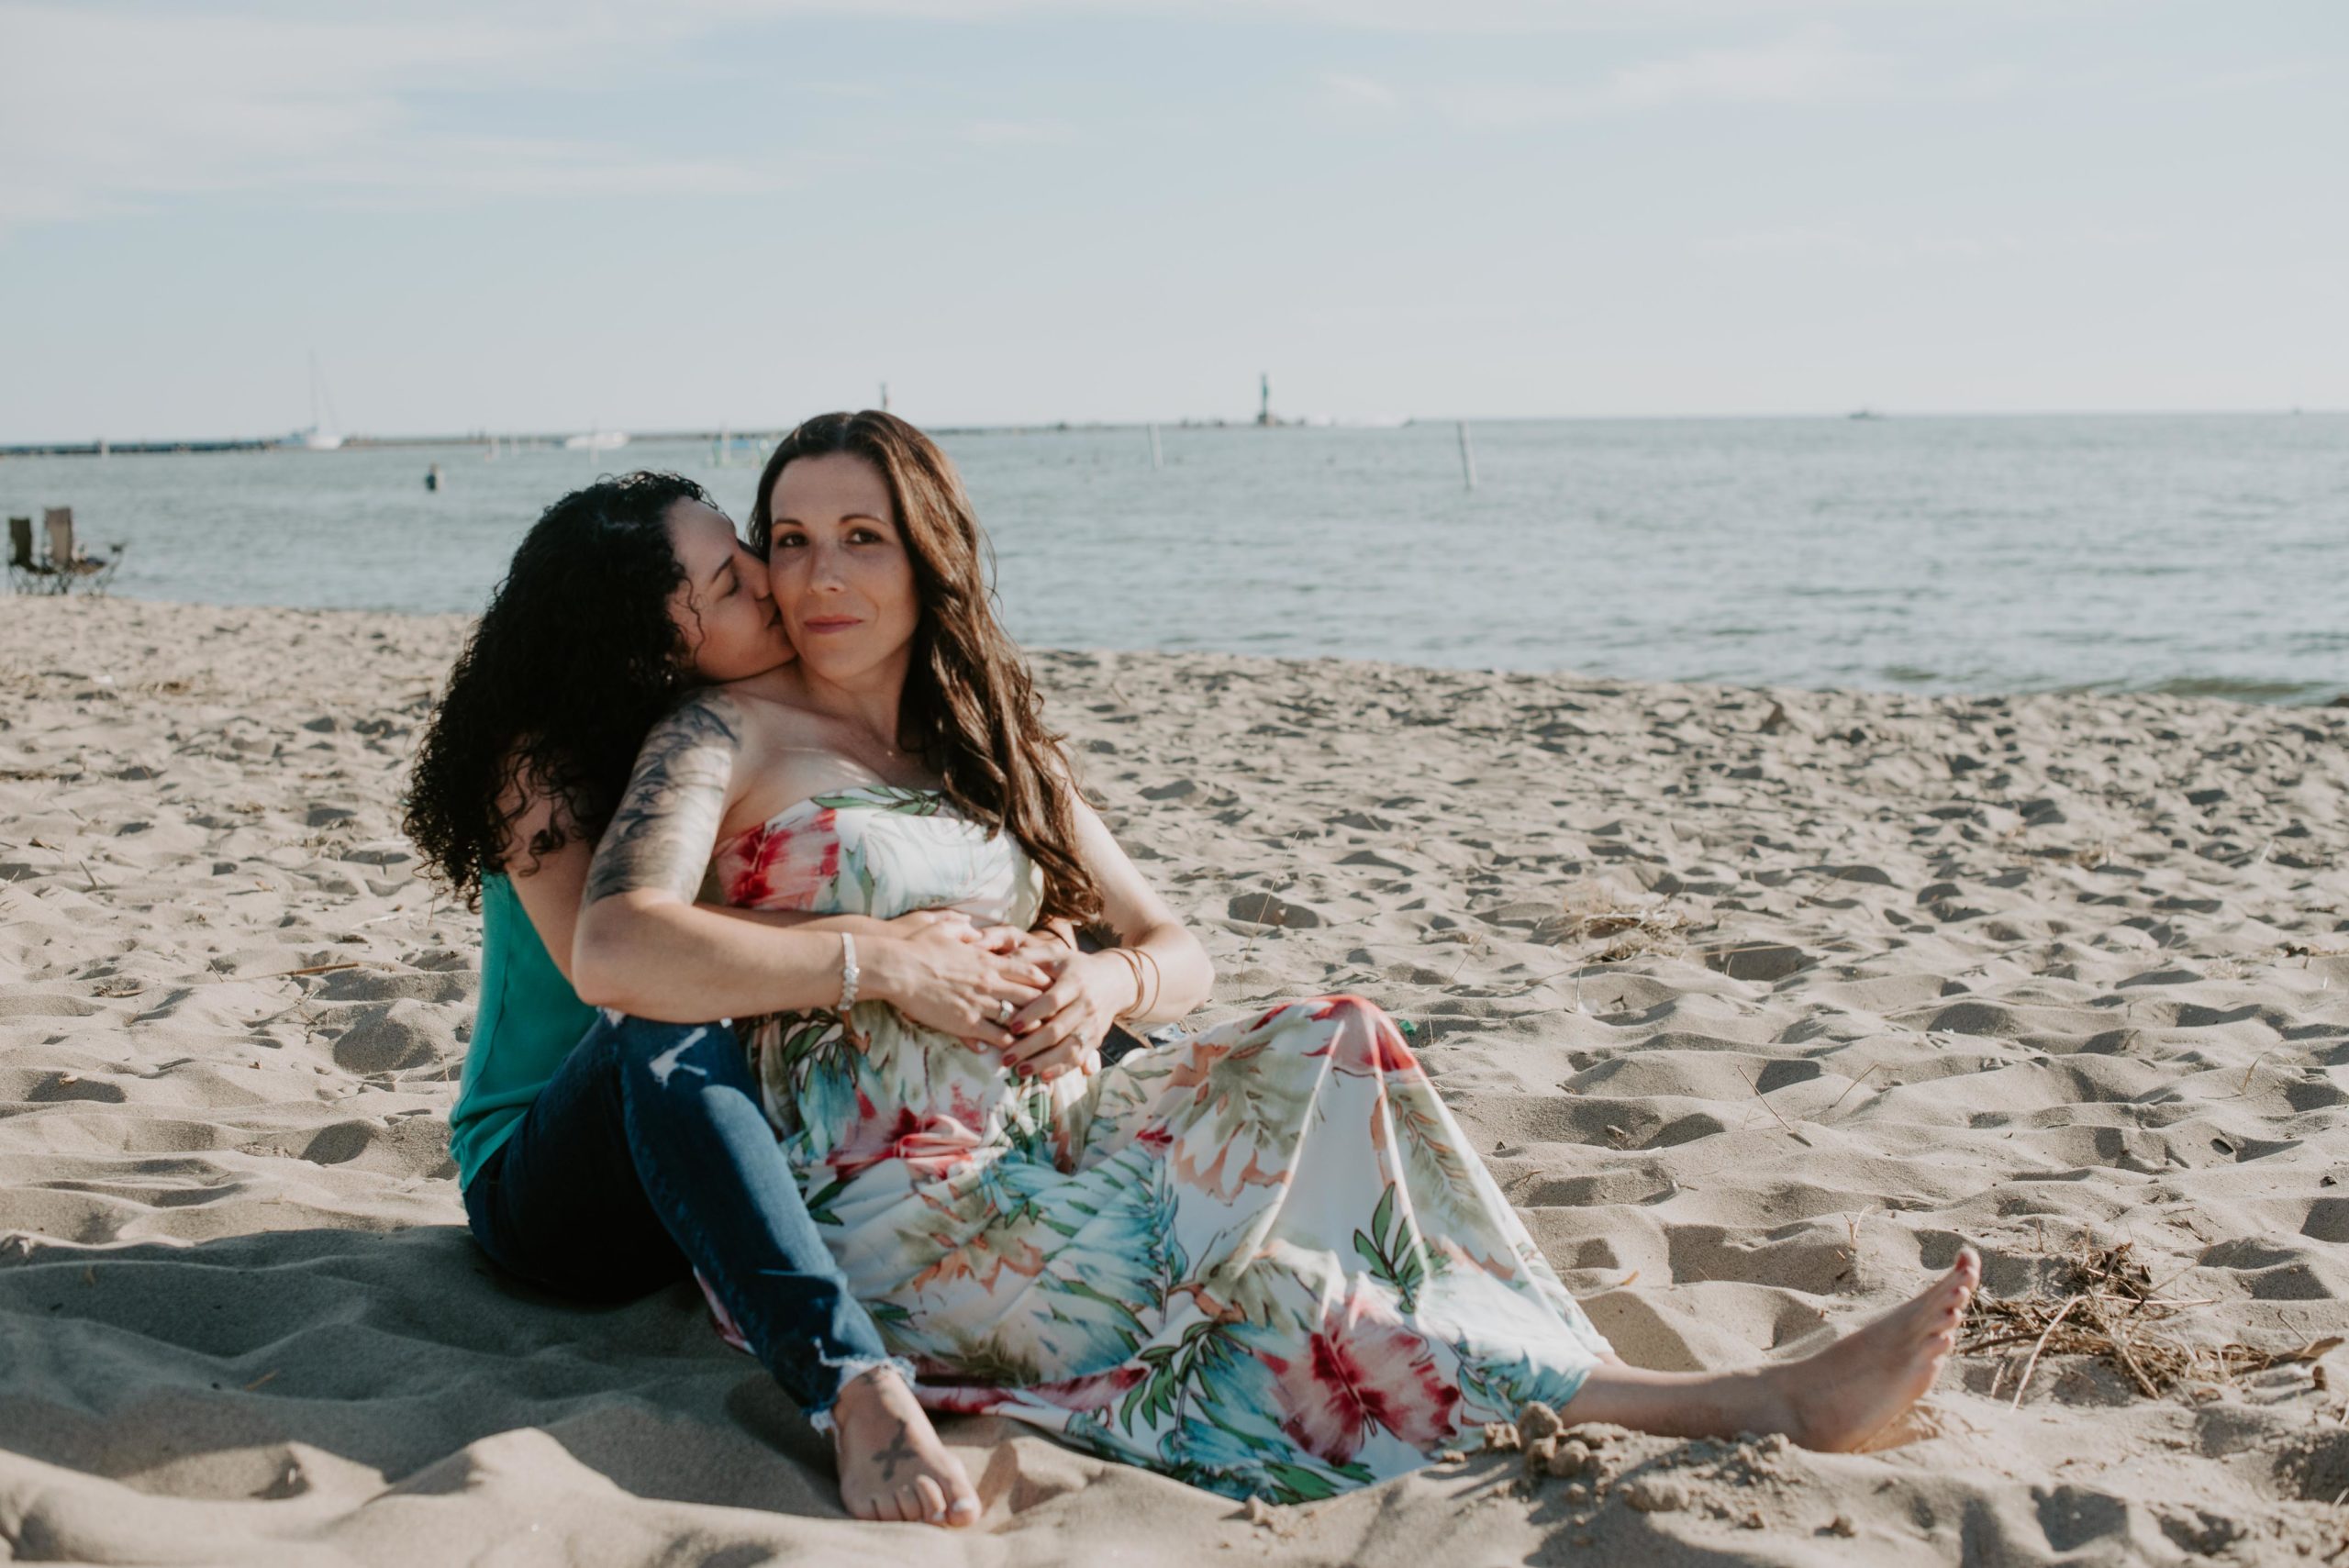 same sex maternity photos at holland state park on the beach. Two moms one in a flowy floral print maternity dress and the other in a turquoise top. Lesbian moms LGTBQ maternity photographer in Grand Rapids Michigan. 